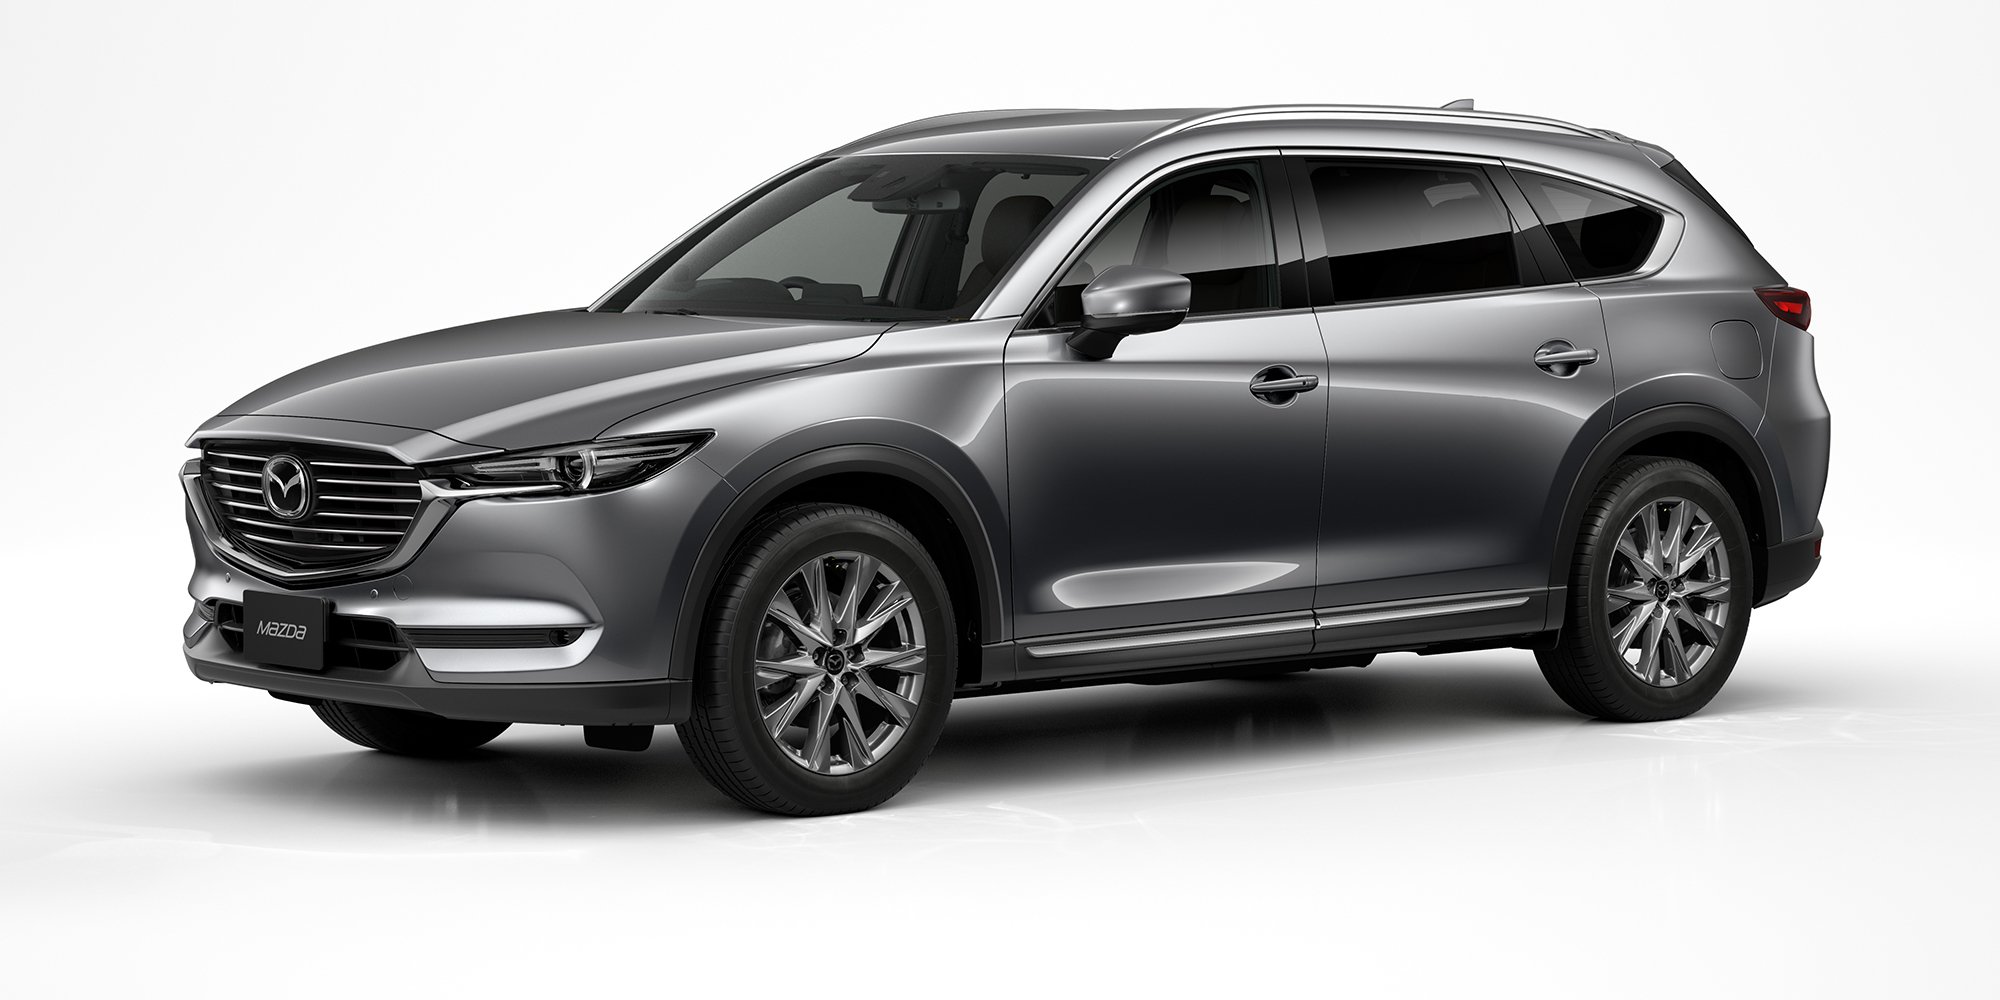 Mazda CX-8 confirmed for Australia, here second-half 2018 - Photos (1 of 6)